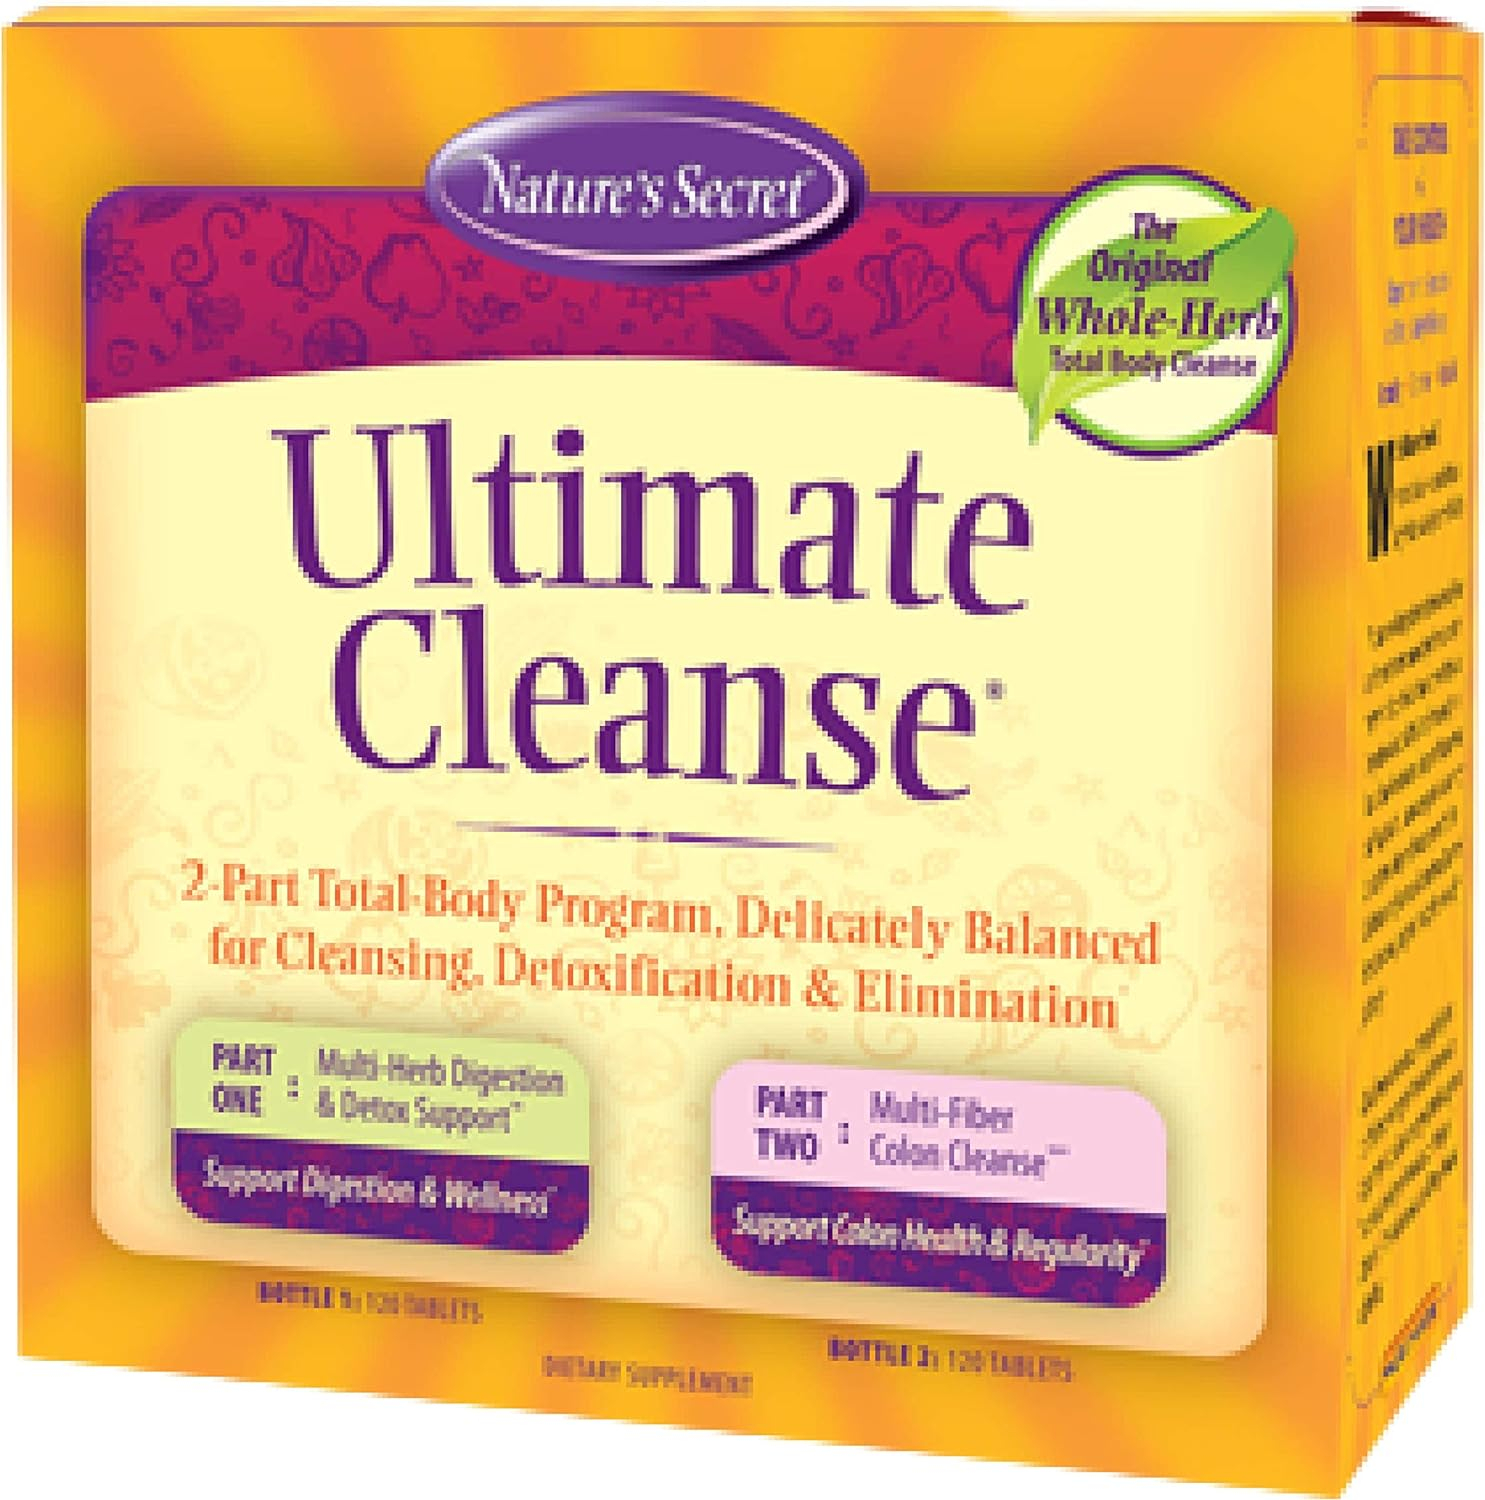 Natures Secret Ultimate Cleanse 2-Part Total Body Detoxification  Elimination Supports Digestion, Wellness, Colon Health  Regularity - Multi-Herb Digestion  Multi-Fiber Cleanse - 240 Tablets